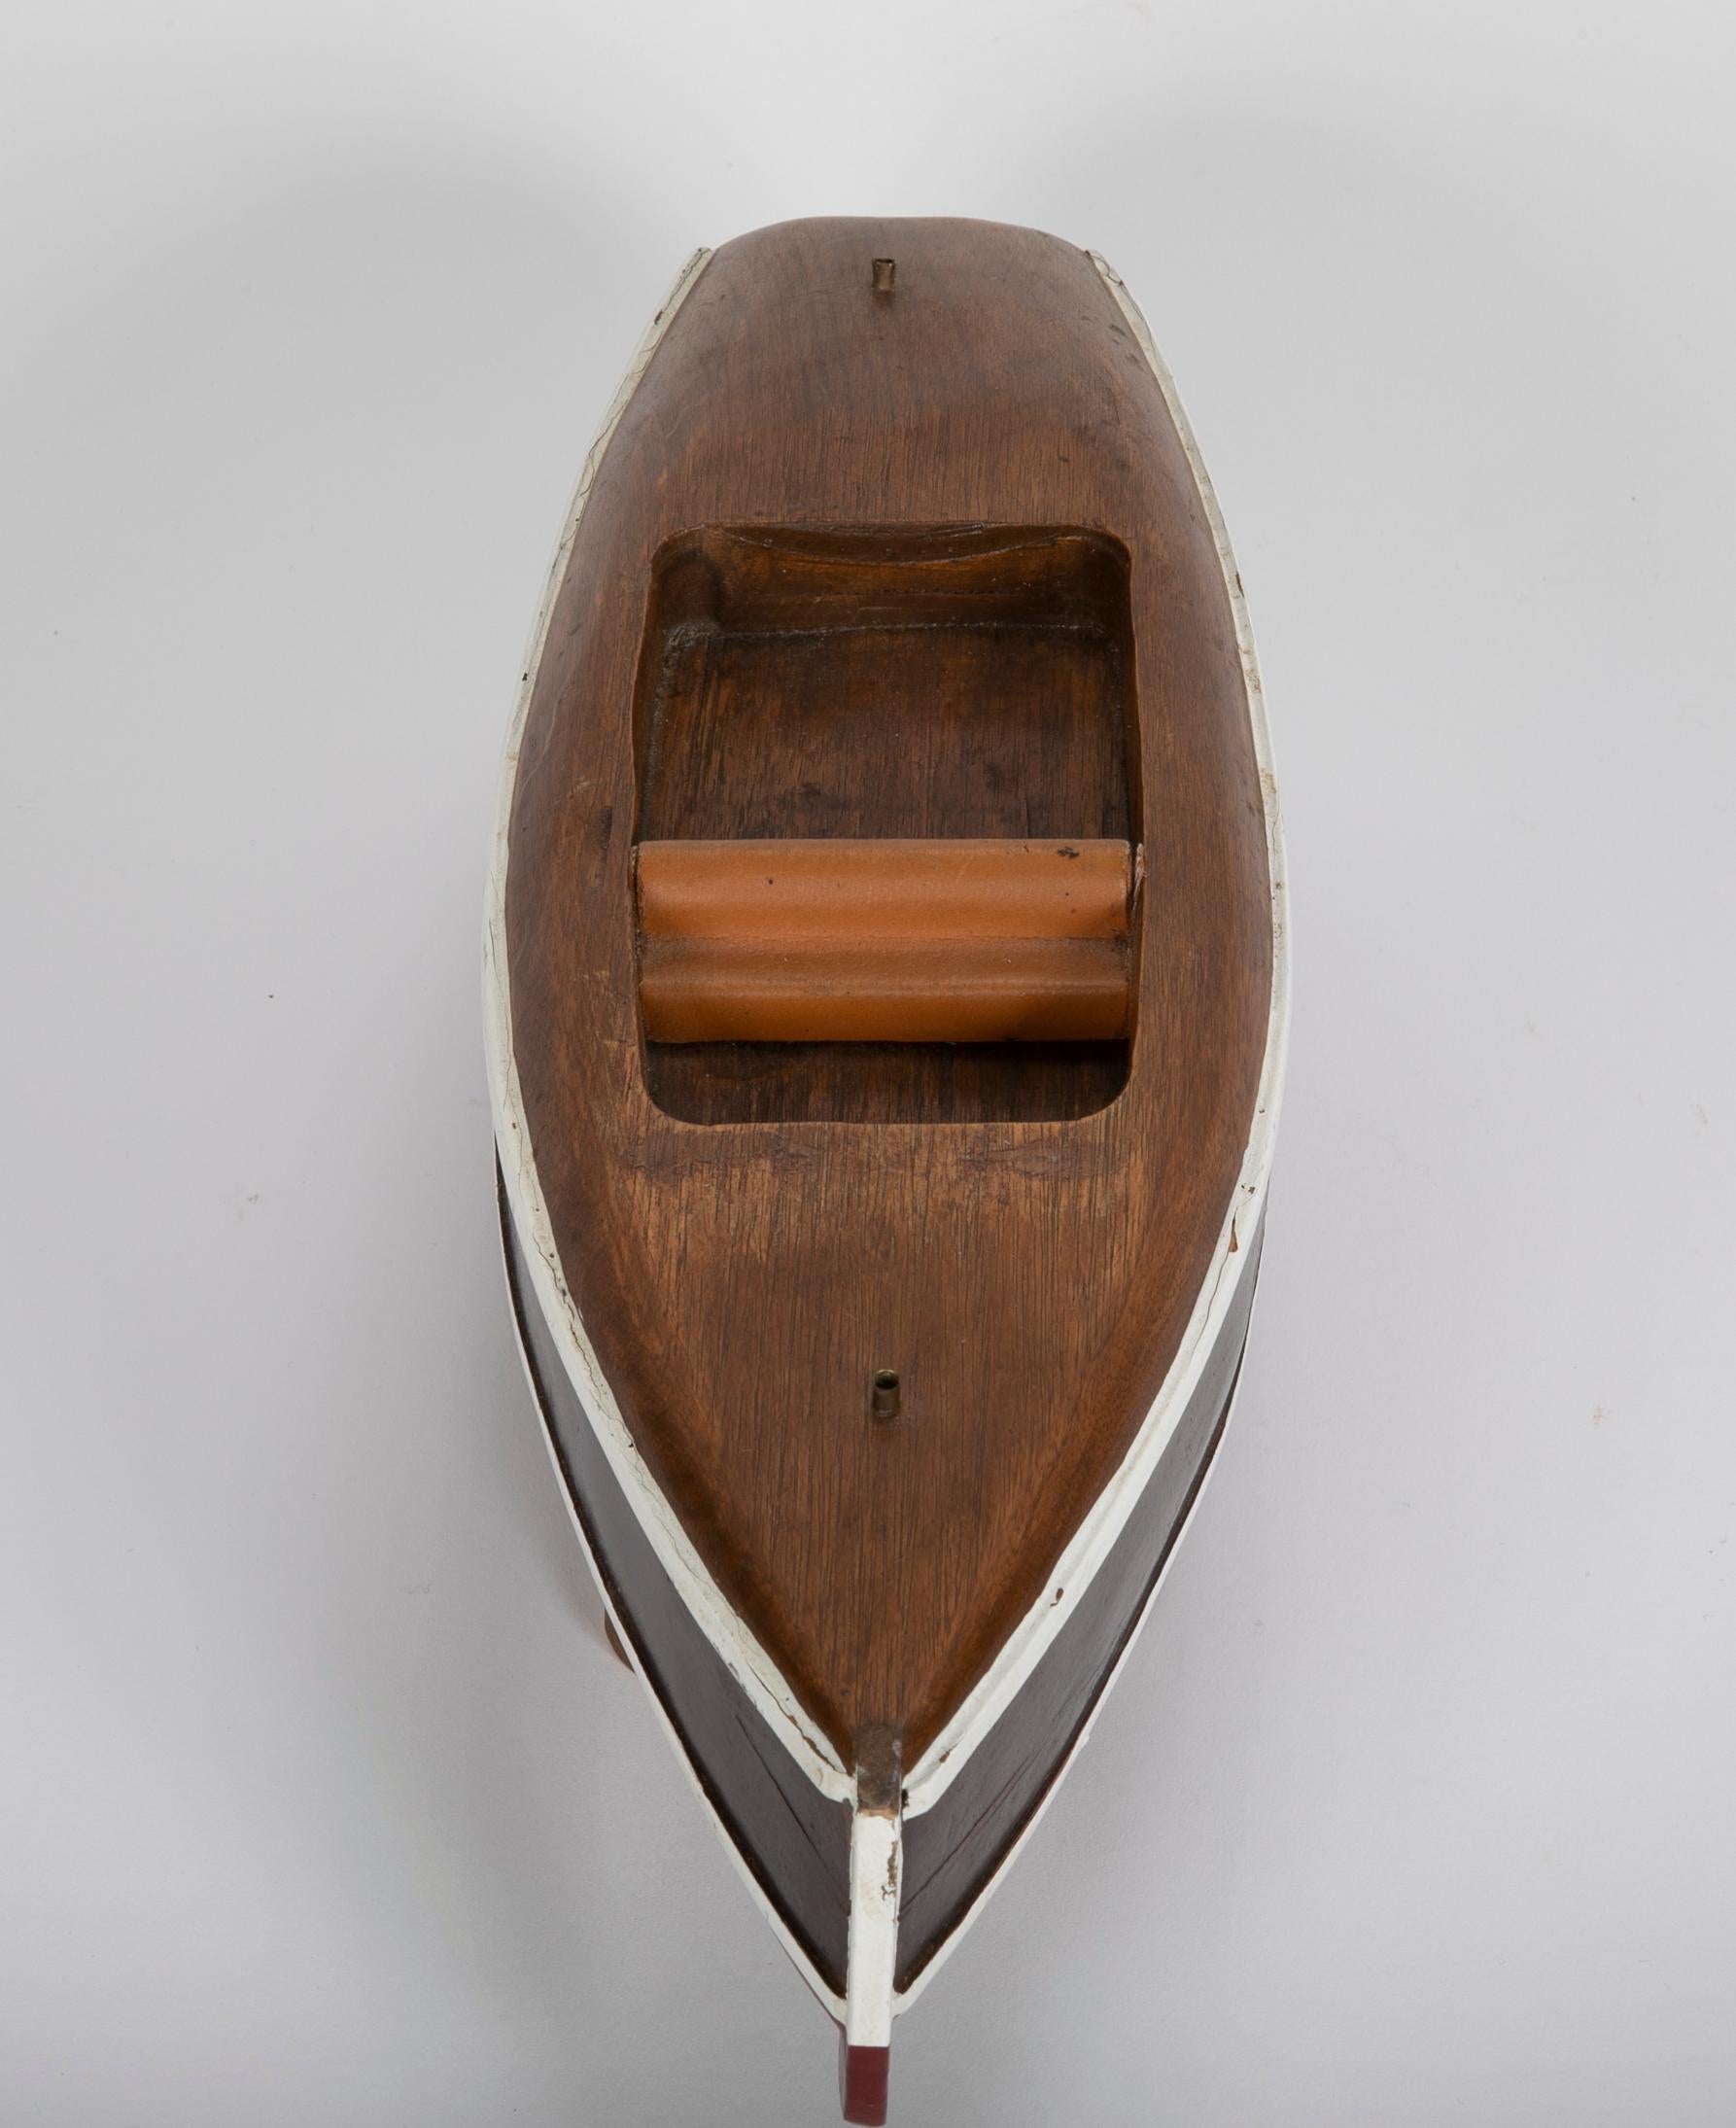 Hand-Crafted Small Wooden Cabin Cruiser Boat Model